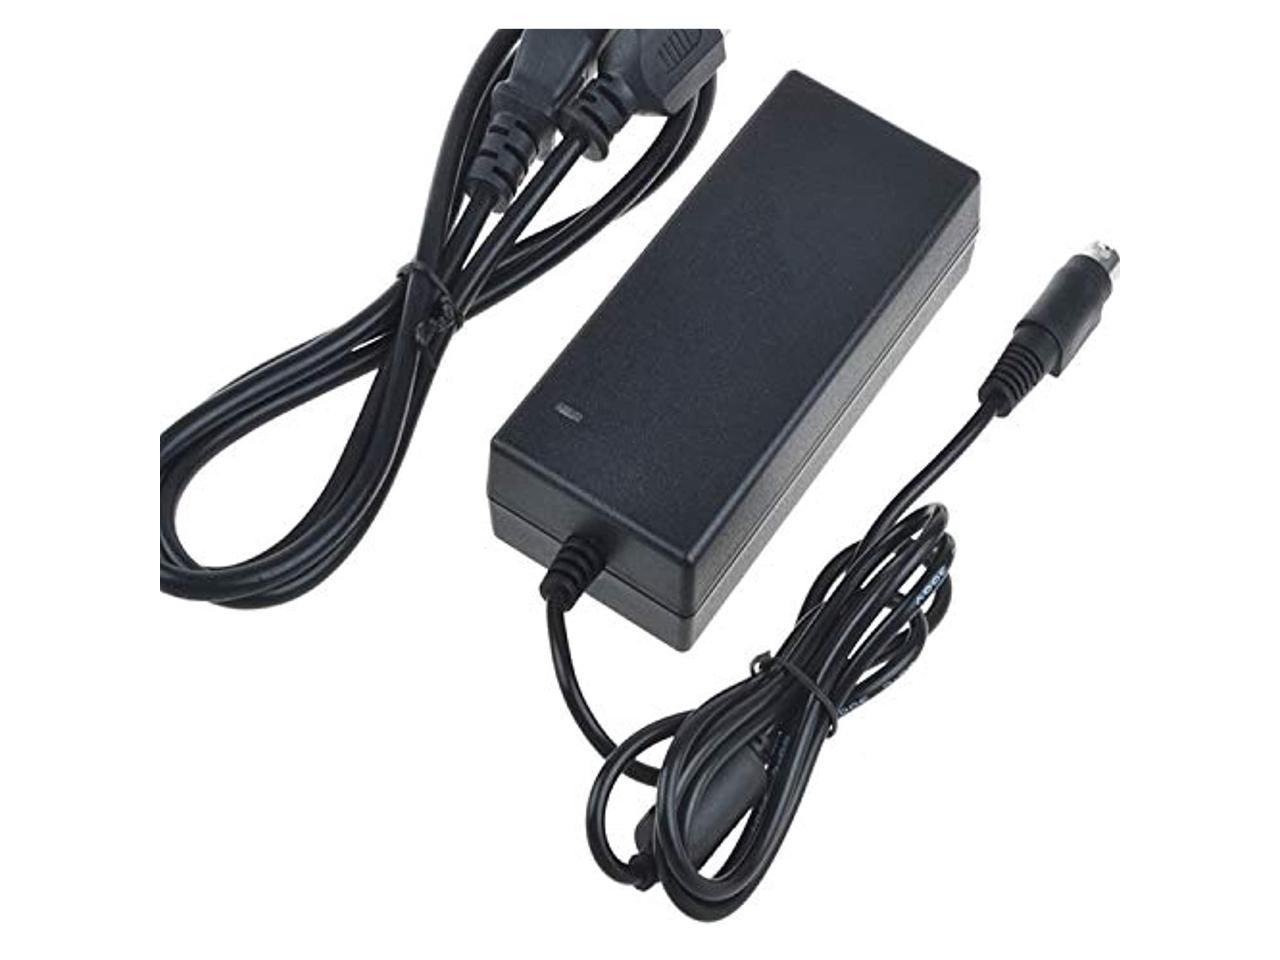 6-Pin Mini Din 6 Prong Plug Tip Ac/Dc Adapter For Lt Honor Ads-1234Taaa 12V 5V Switching Mode Power Supply Cord Input V